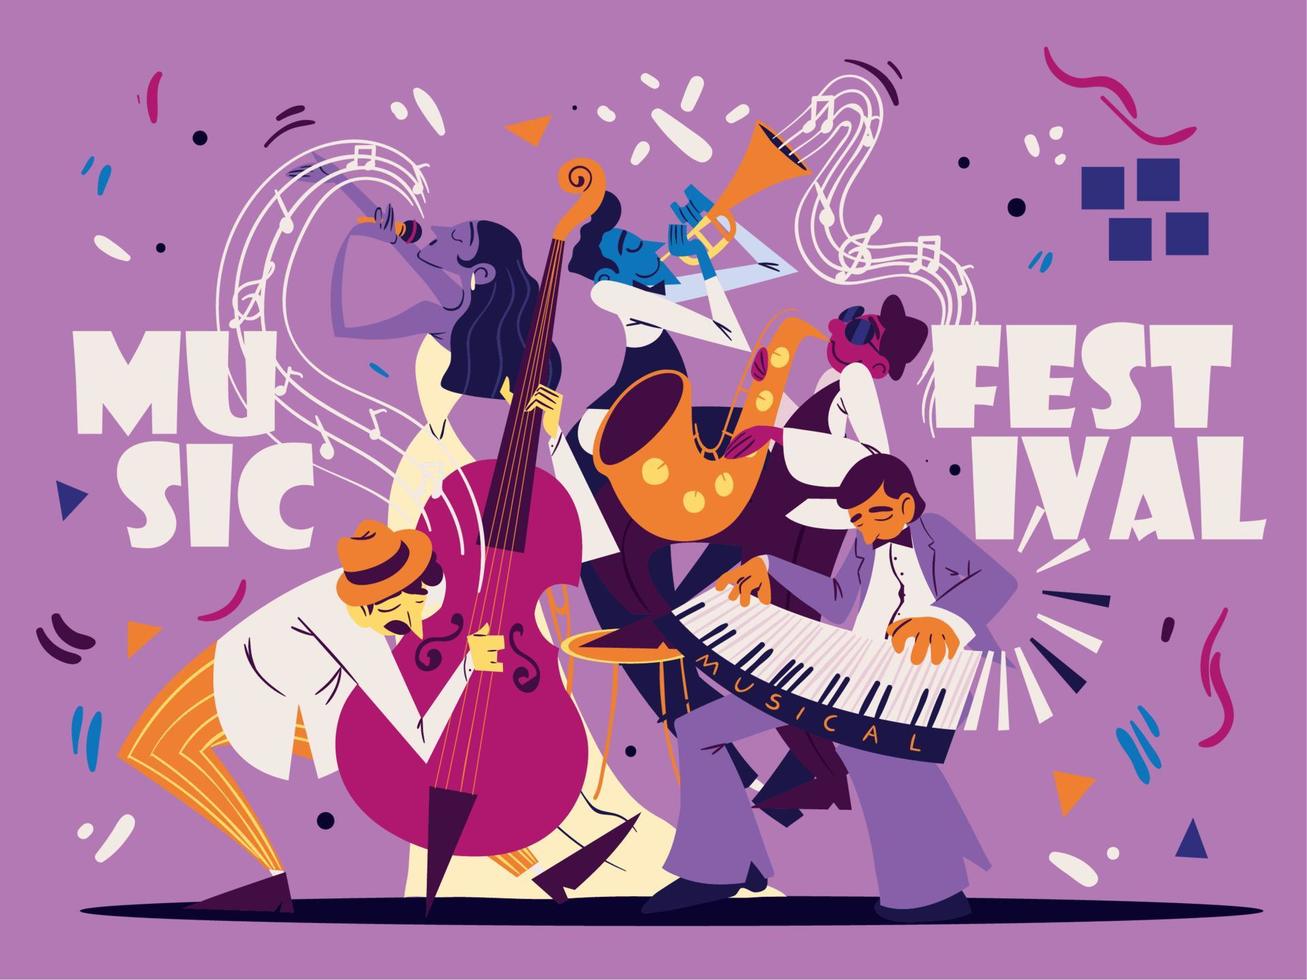 musicians and music festival poster vector